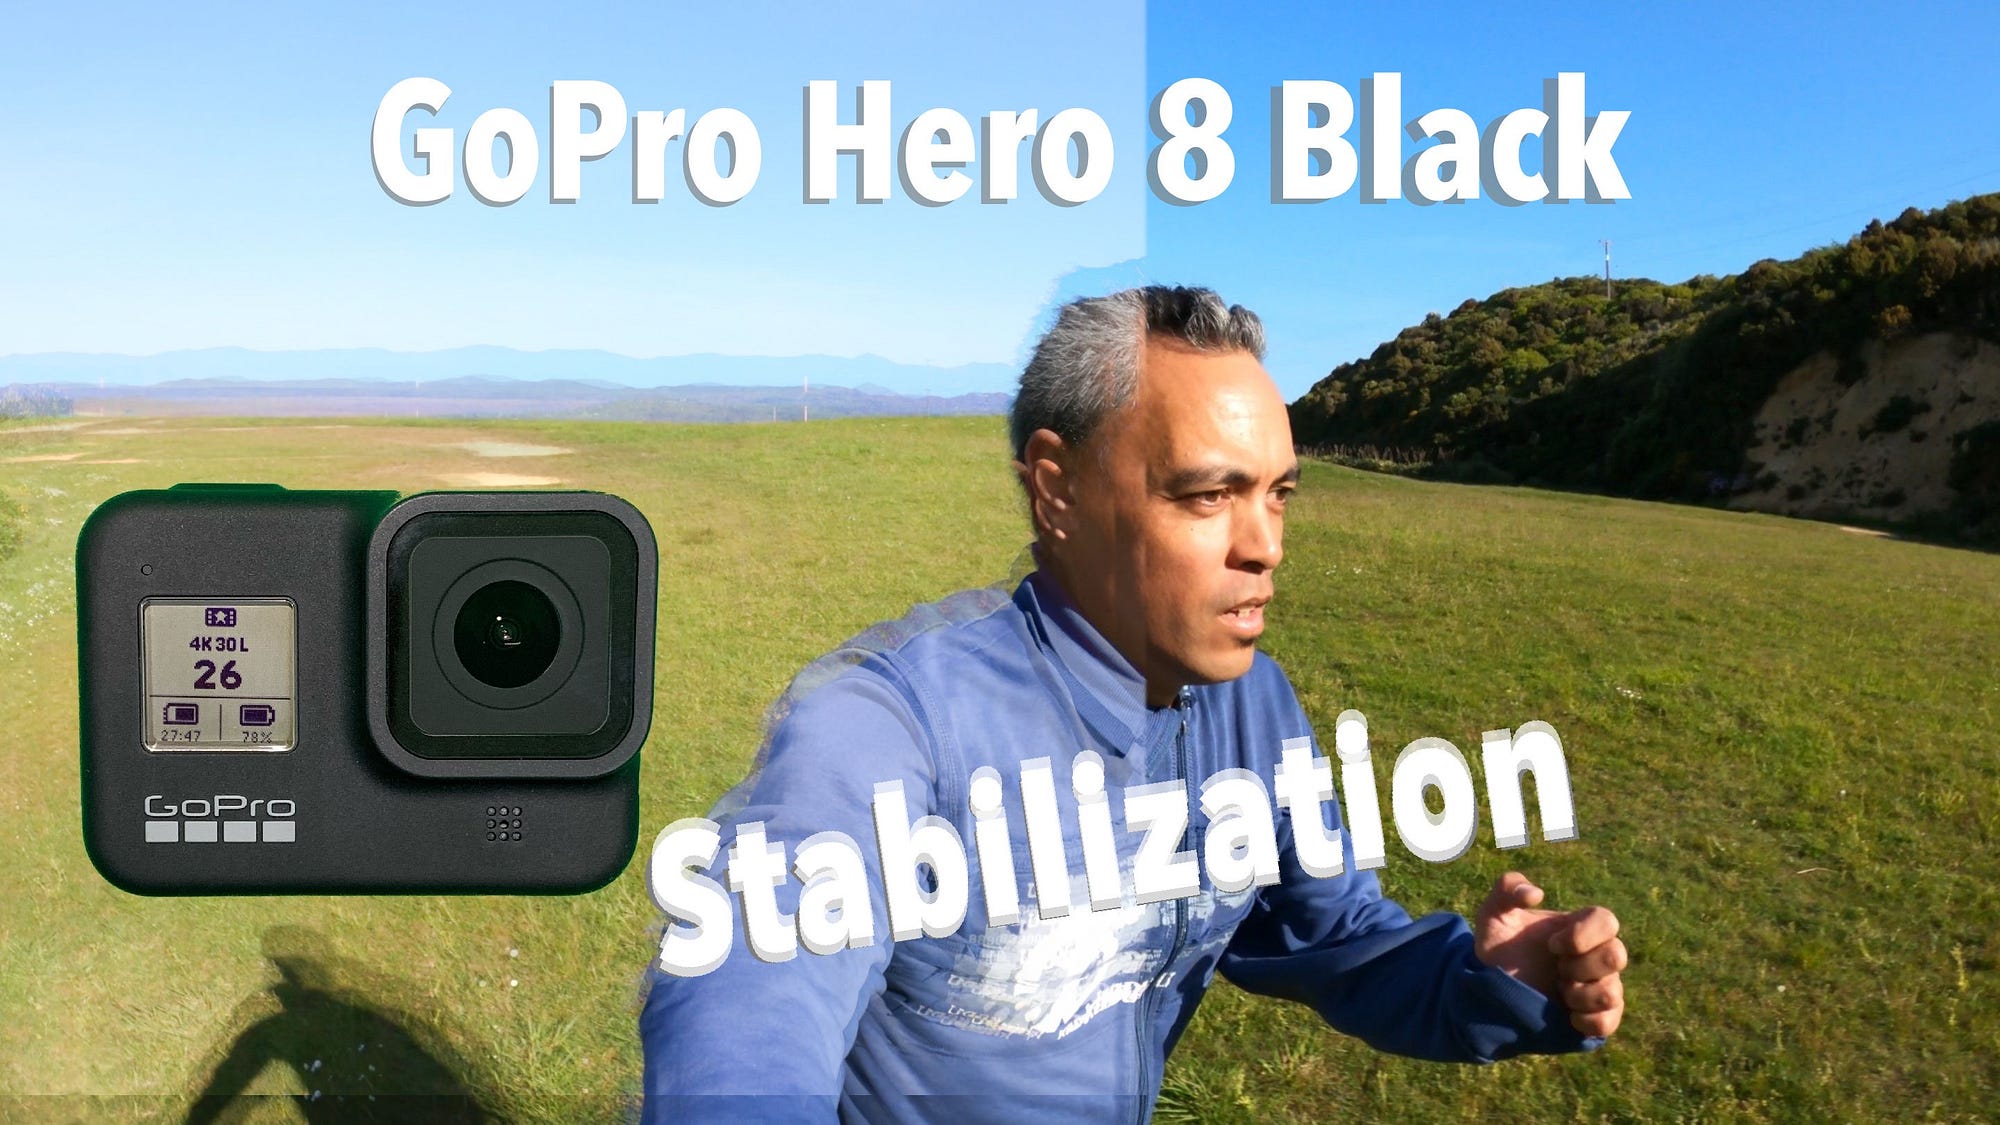 GoPro Hero 8 Black Stabilization. Is it as good as they say?, by John  Mills